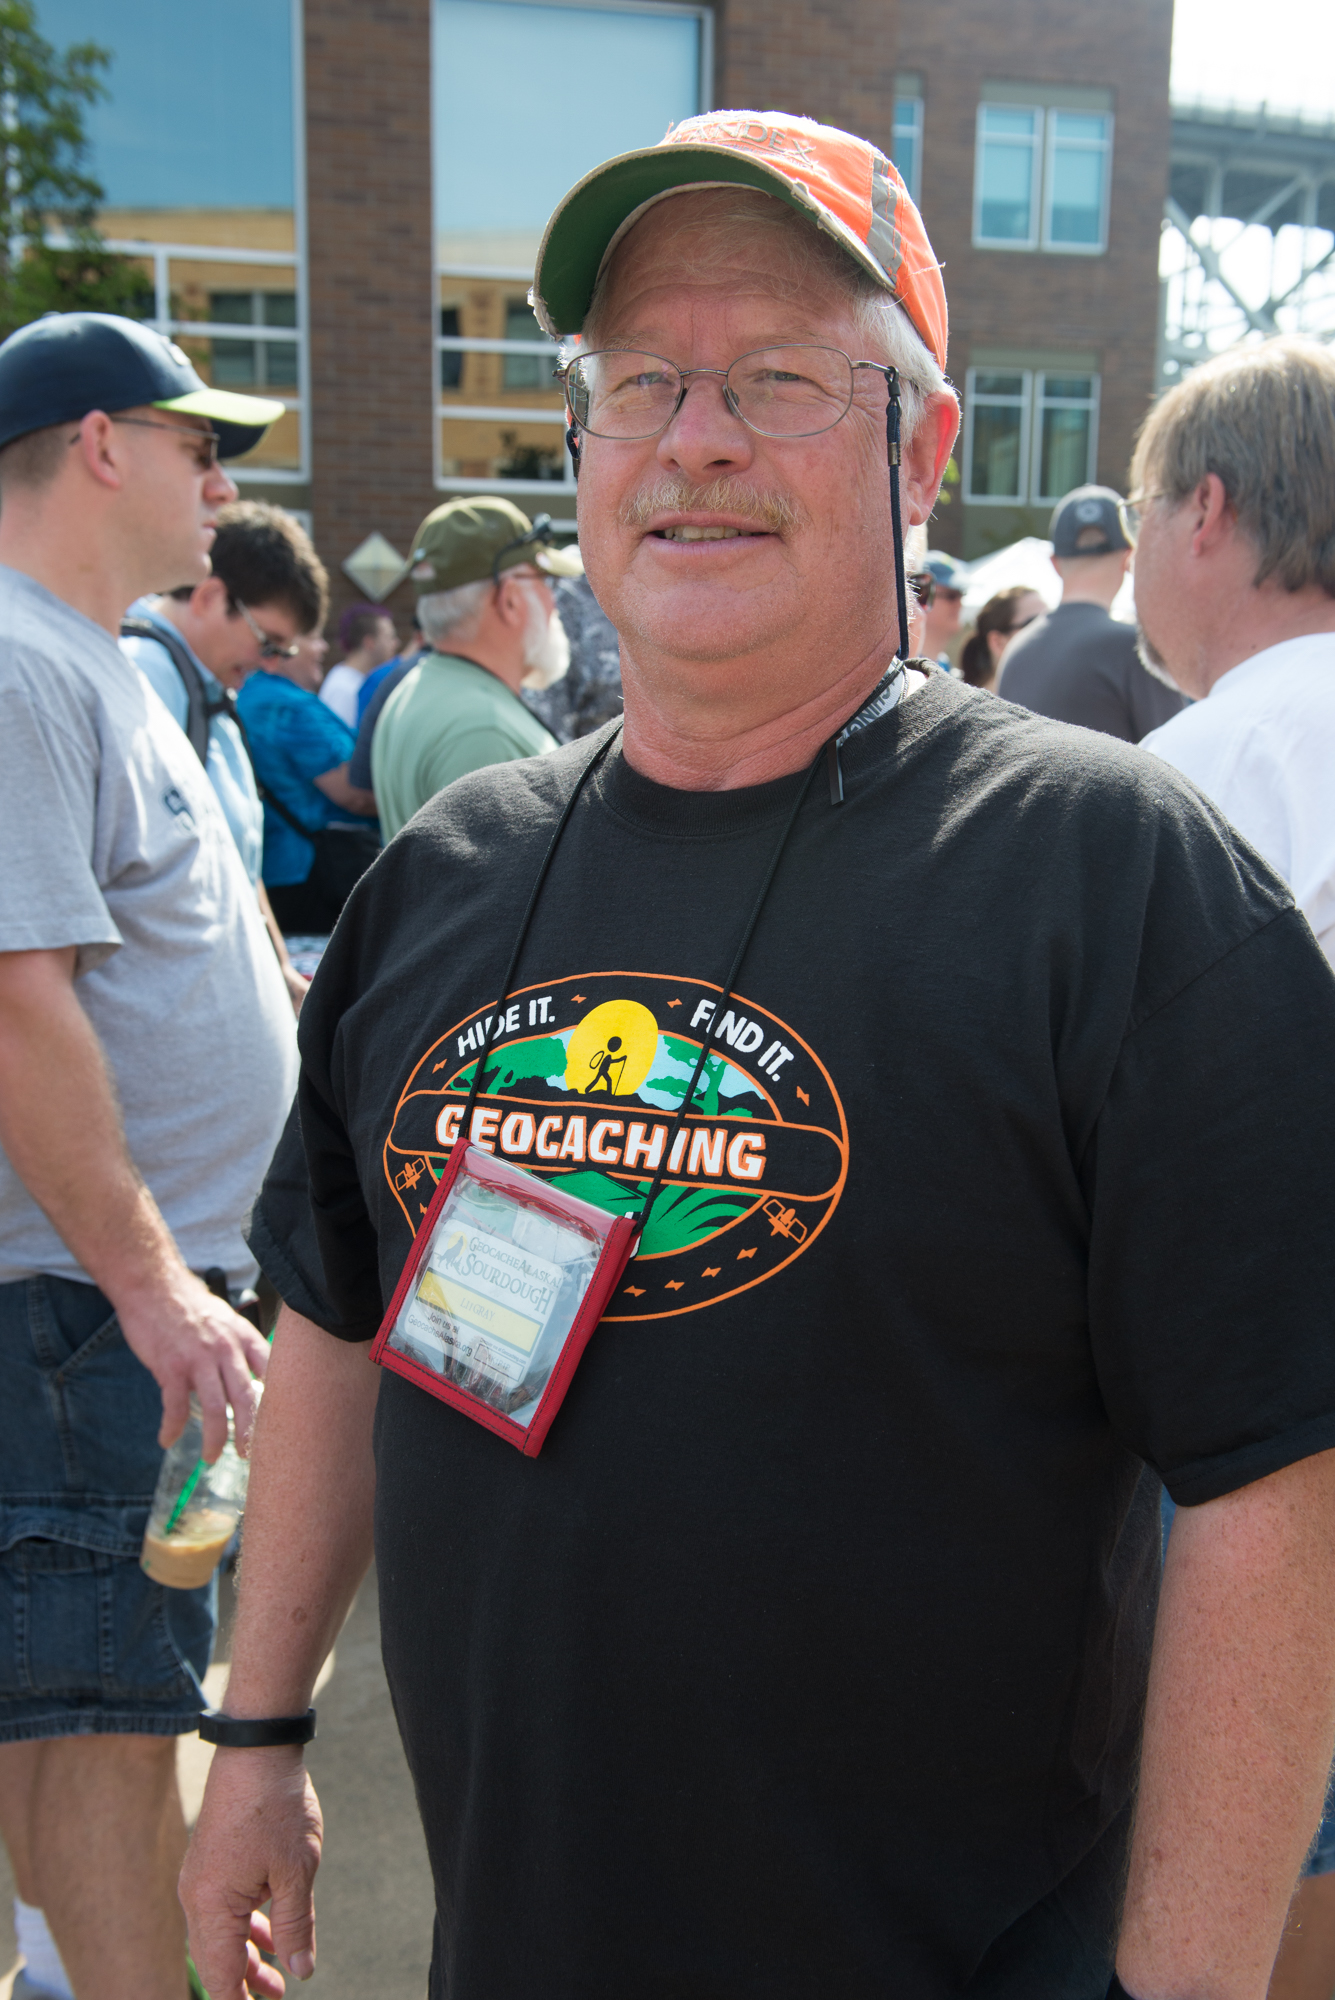 A cacher from Alaska dons his Geocache shirt for the event. Photo by Morgen Schuler